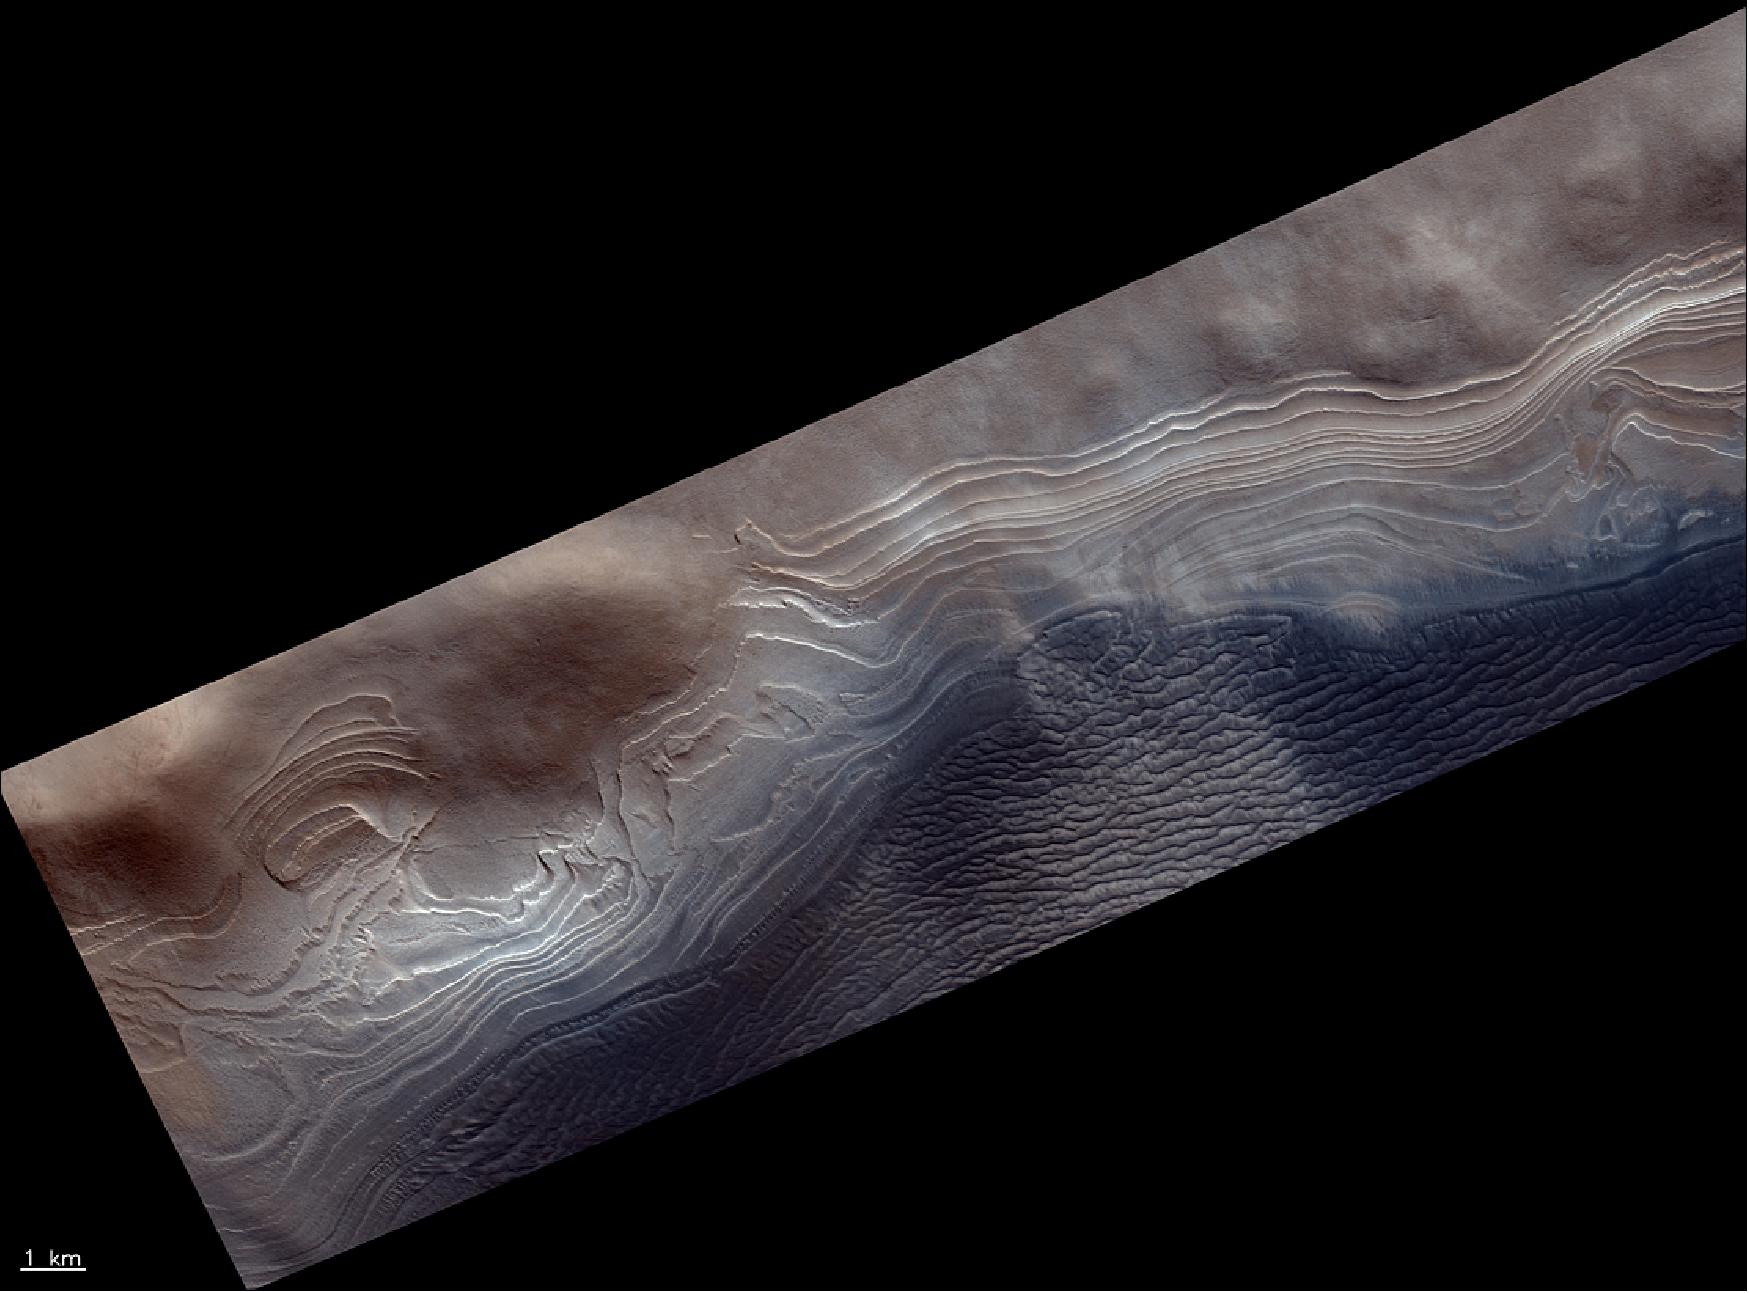 Figure 77: This image shows the edge of a layered mound in the Burroughs crater on Mars. It is located about 200 km to the northwest of the northernmost edge of the planet’s south polar ice cap. The image was taken by the CaSSIS instrument onboard the ESA-Roscosmos ExoMars TGO and captures a strip of the surface measuring about 25 km x 9 km. The image was taken on 16 December 2018 and is centered at 71.8ºS/114.5ºE (image credit: ESA/Roscosmos/CaSSIS, CC BY-SA 3.0 IGO)